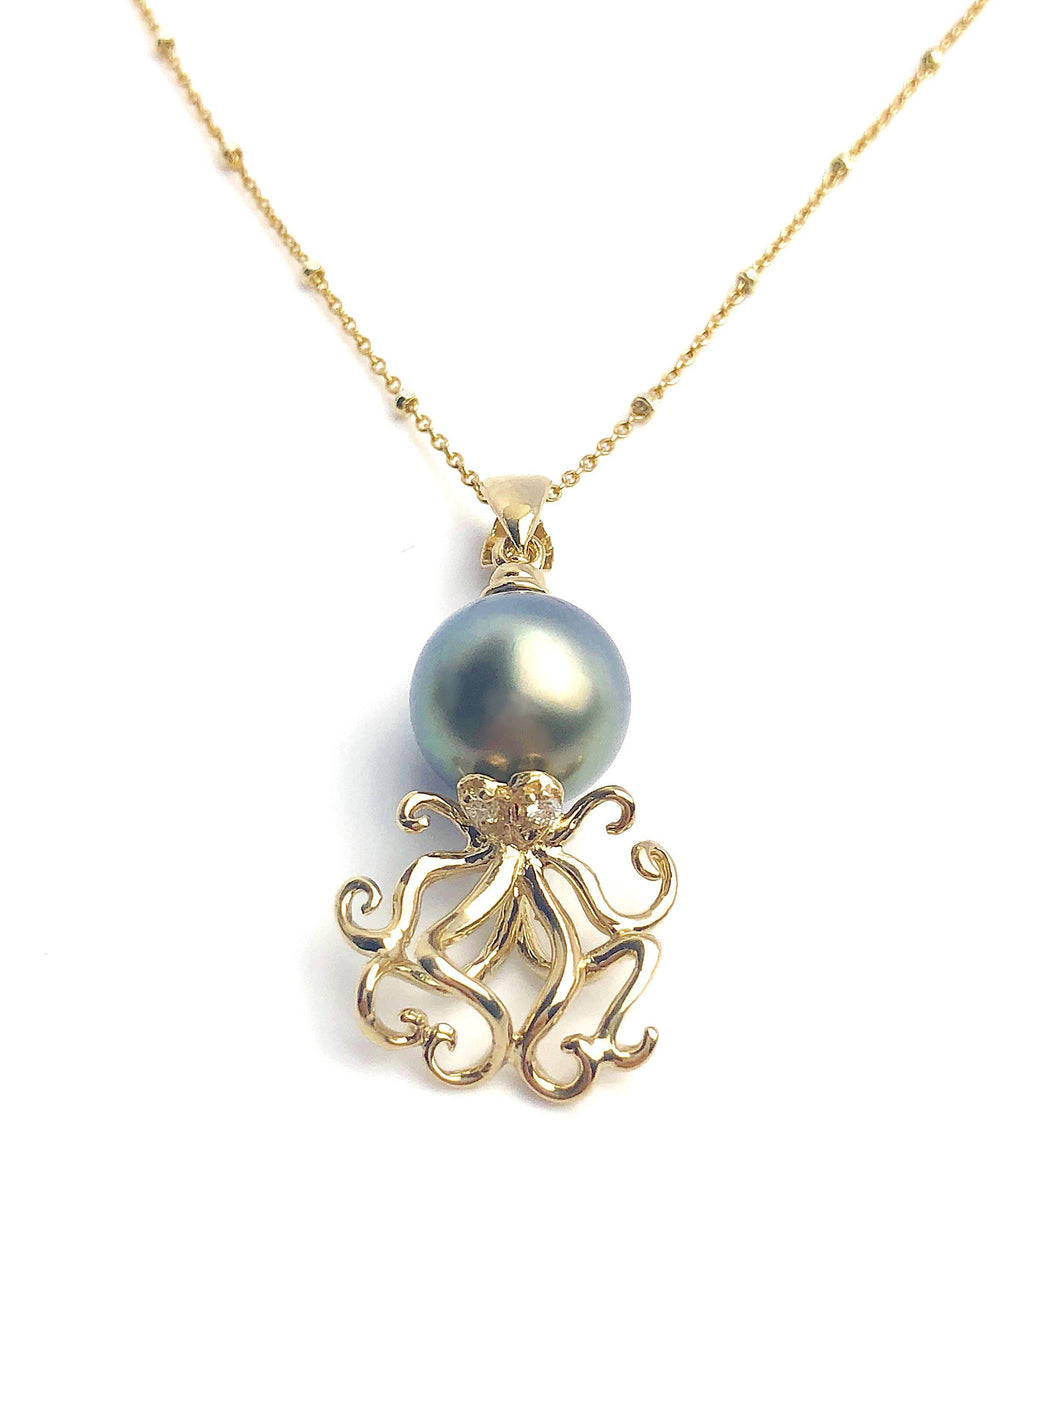 Octopus - Pearl Pendant Setting - 14K Yellow Gold, Rose Gold, White Gold with Diamond - Setting only. No pearl included. JP-964